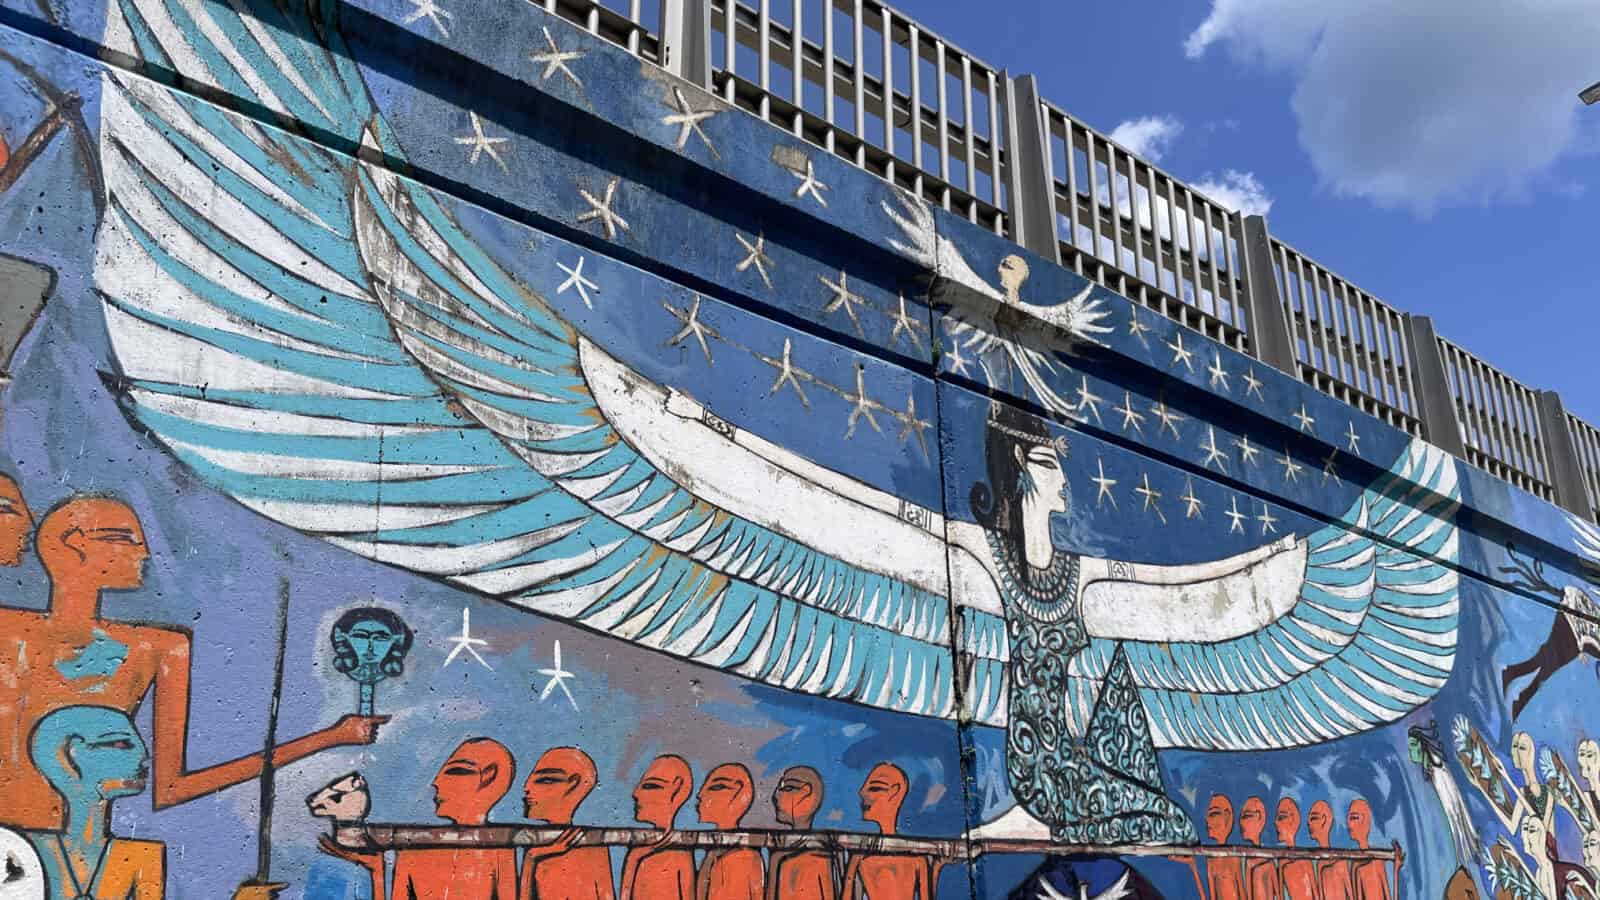 A turquoise and lapis blue woman spreads her wings on the overpass in Egyptian artist Alaa Awad's mural in North Adams.